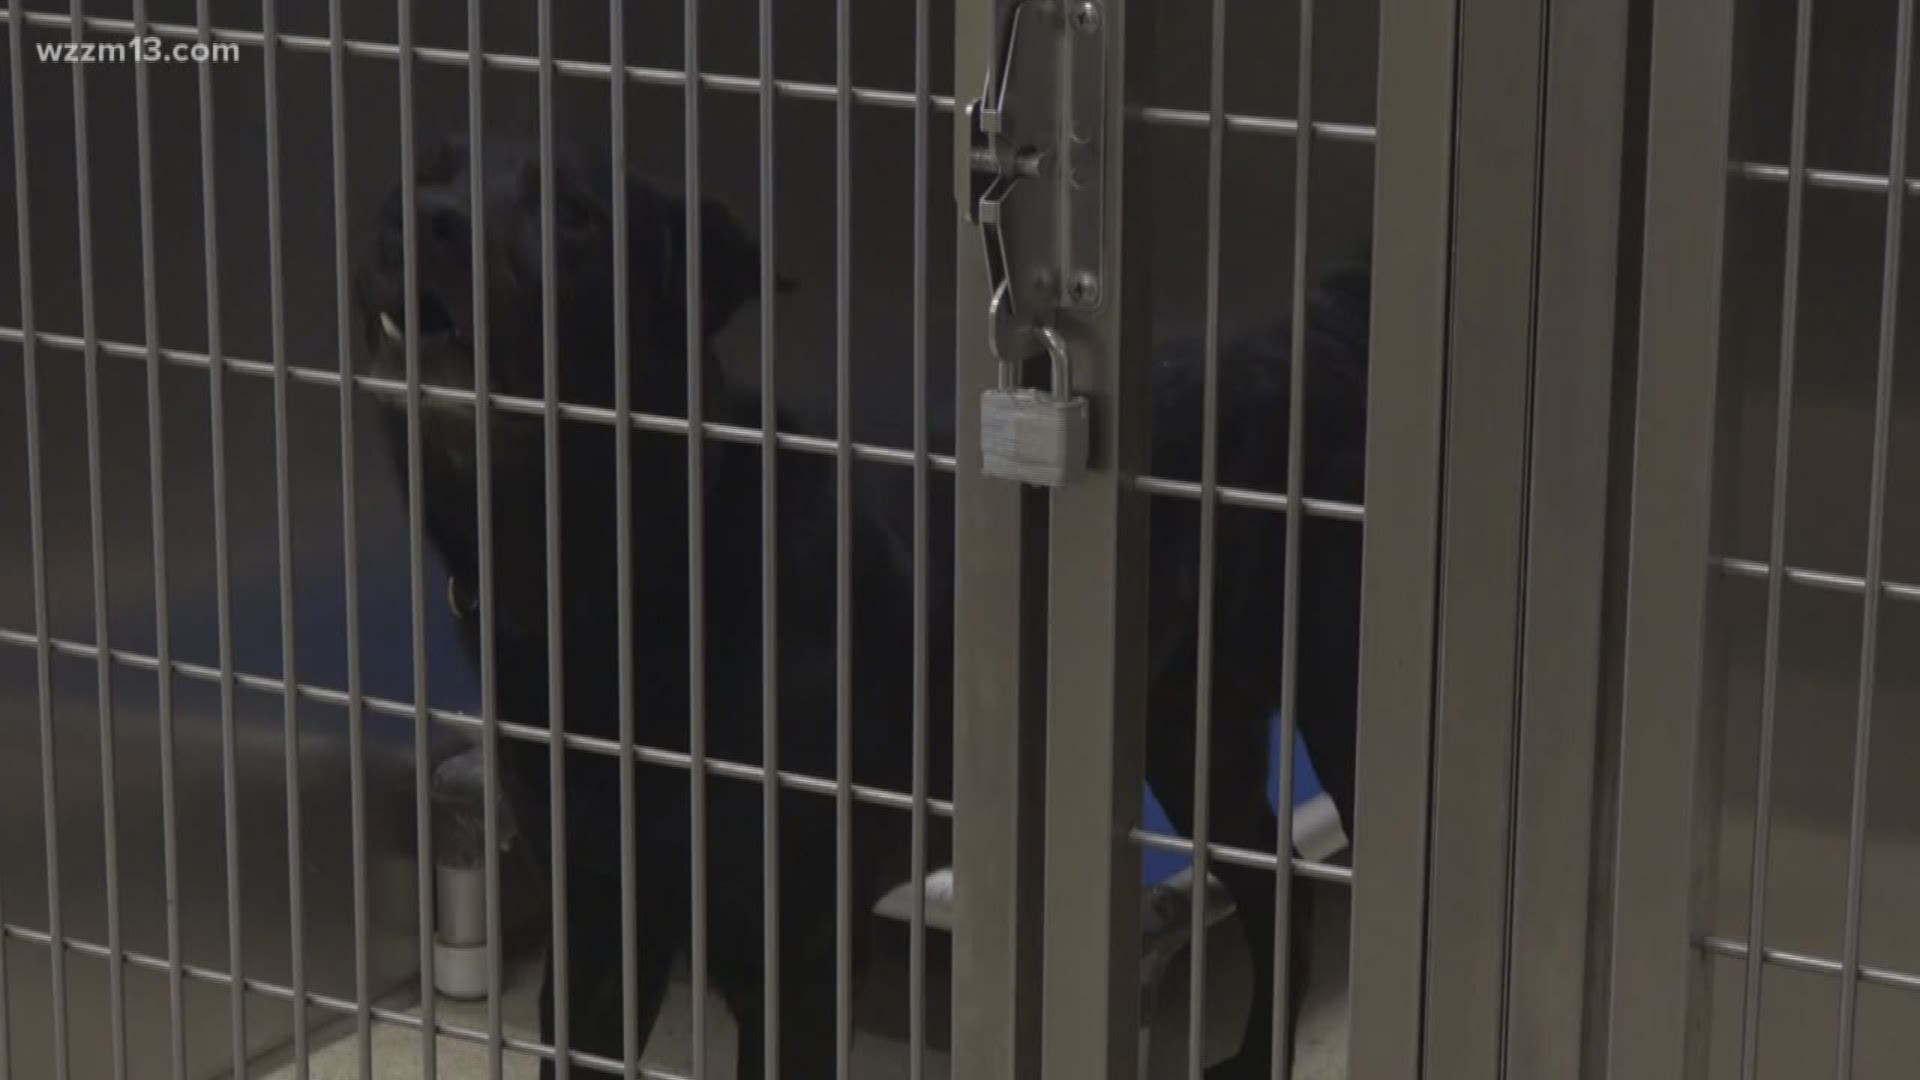 Head of Kent County Animal Shelter resigns